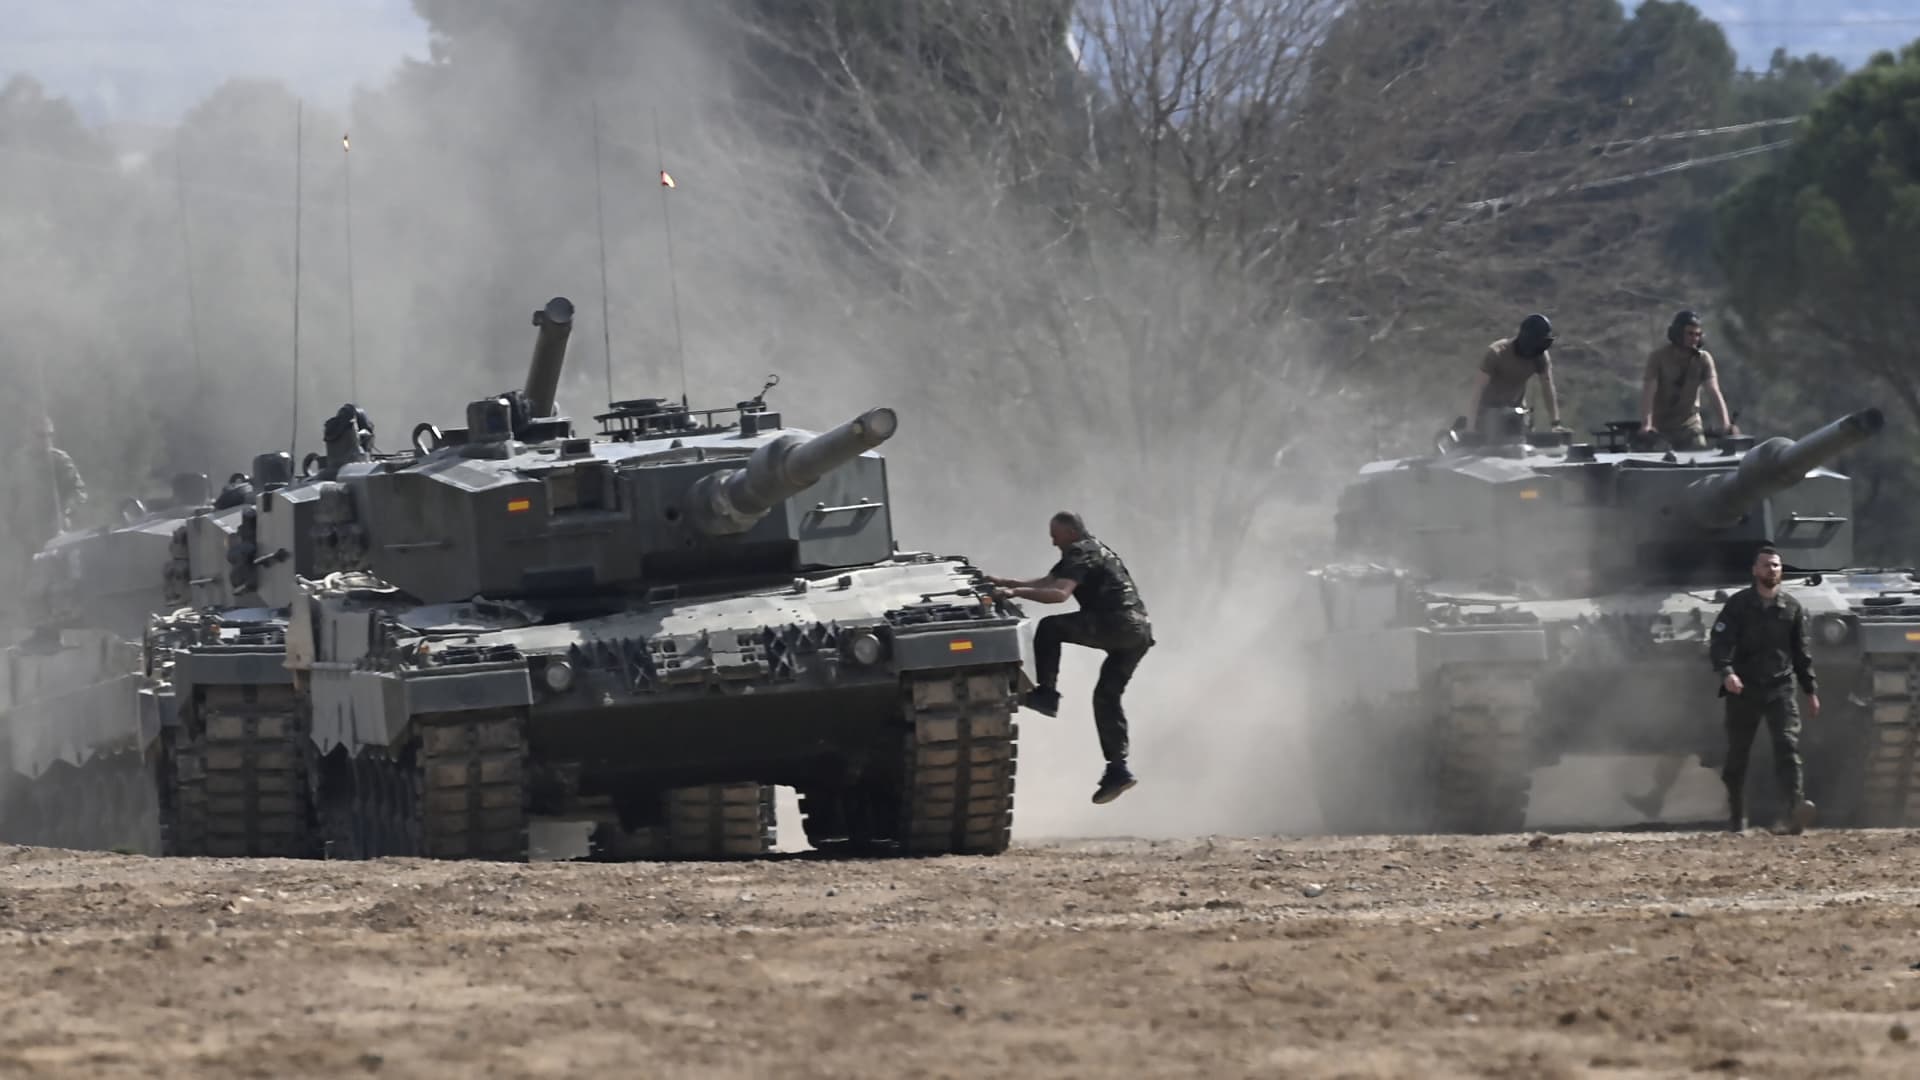 Ukrainian military personnel receive armored maneuver training on German-made Leopard 2 battle tanks at the Spanish army's training center of San Gregorio in Zaragoza on March 13, 2023.